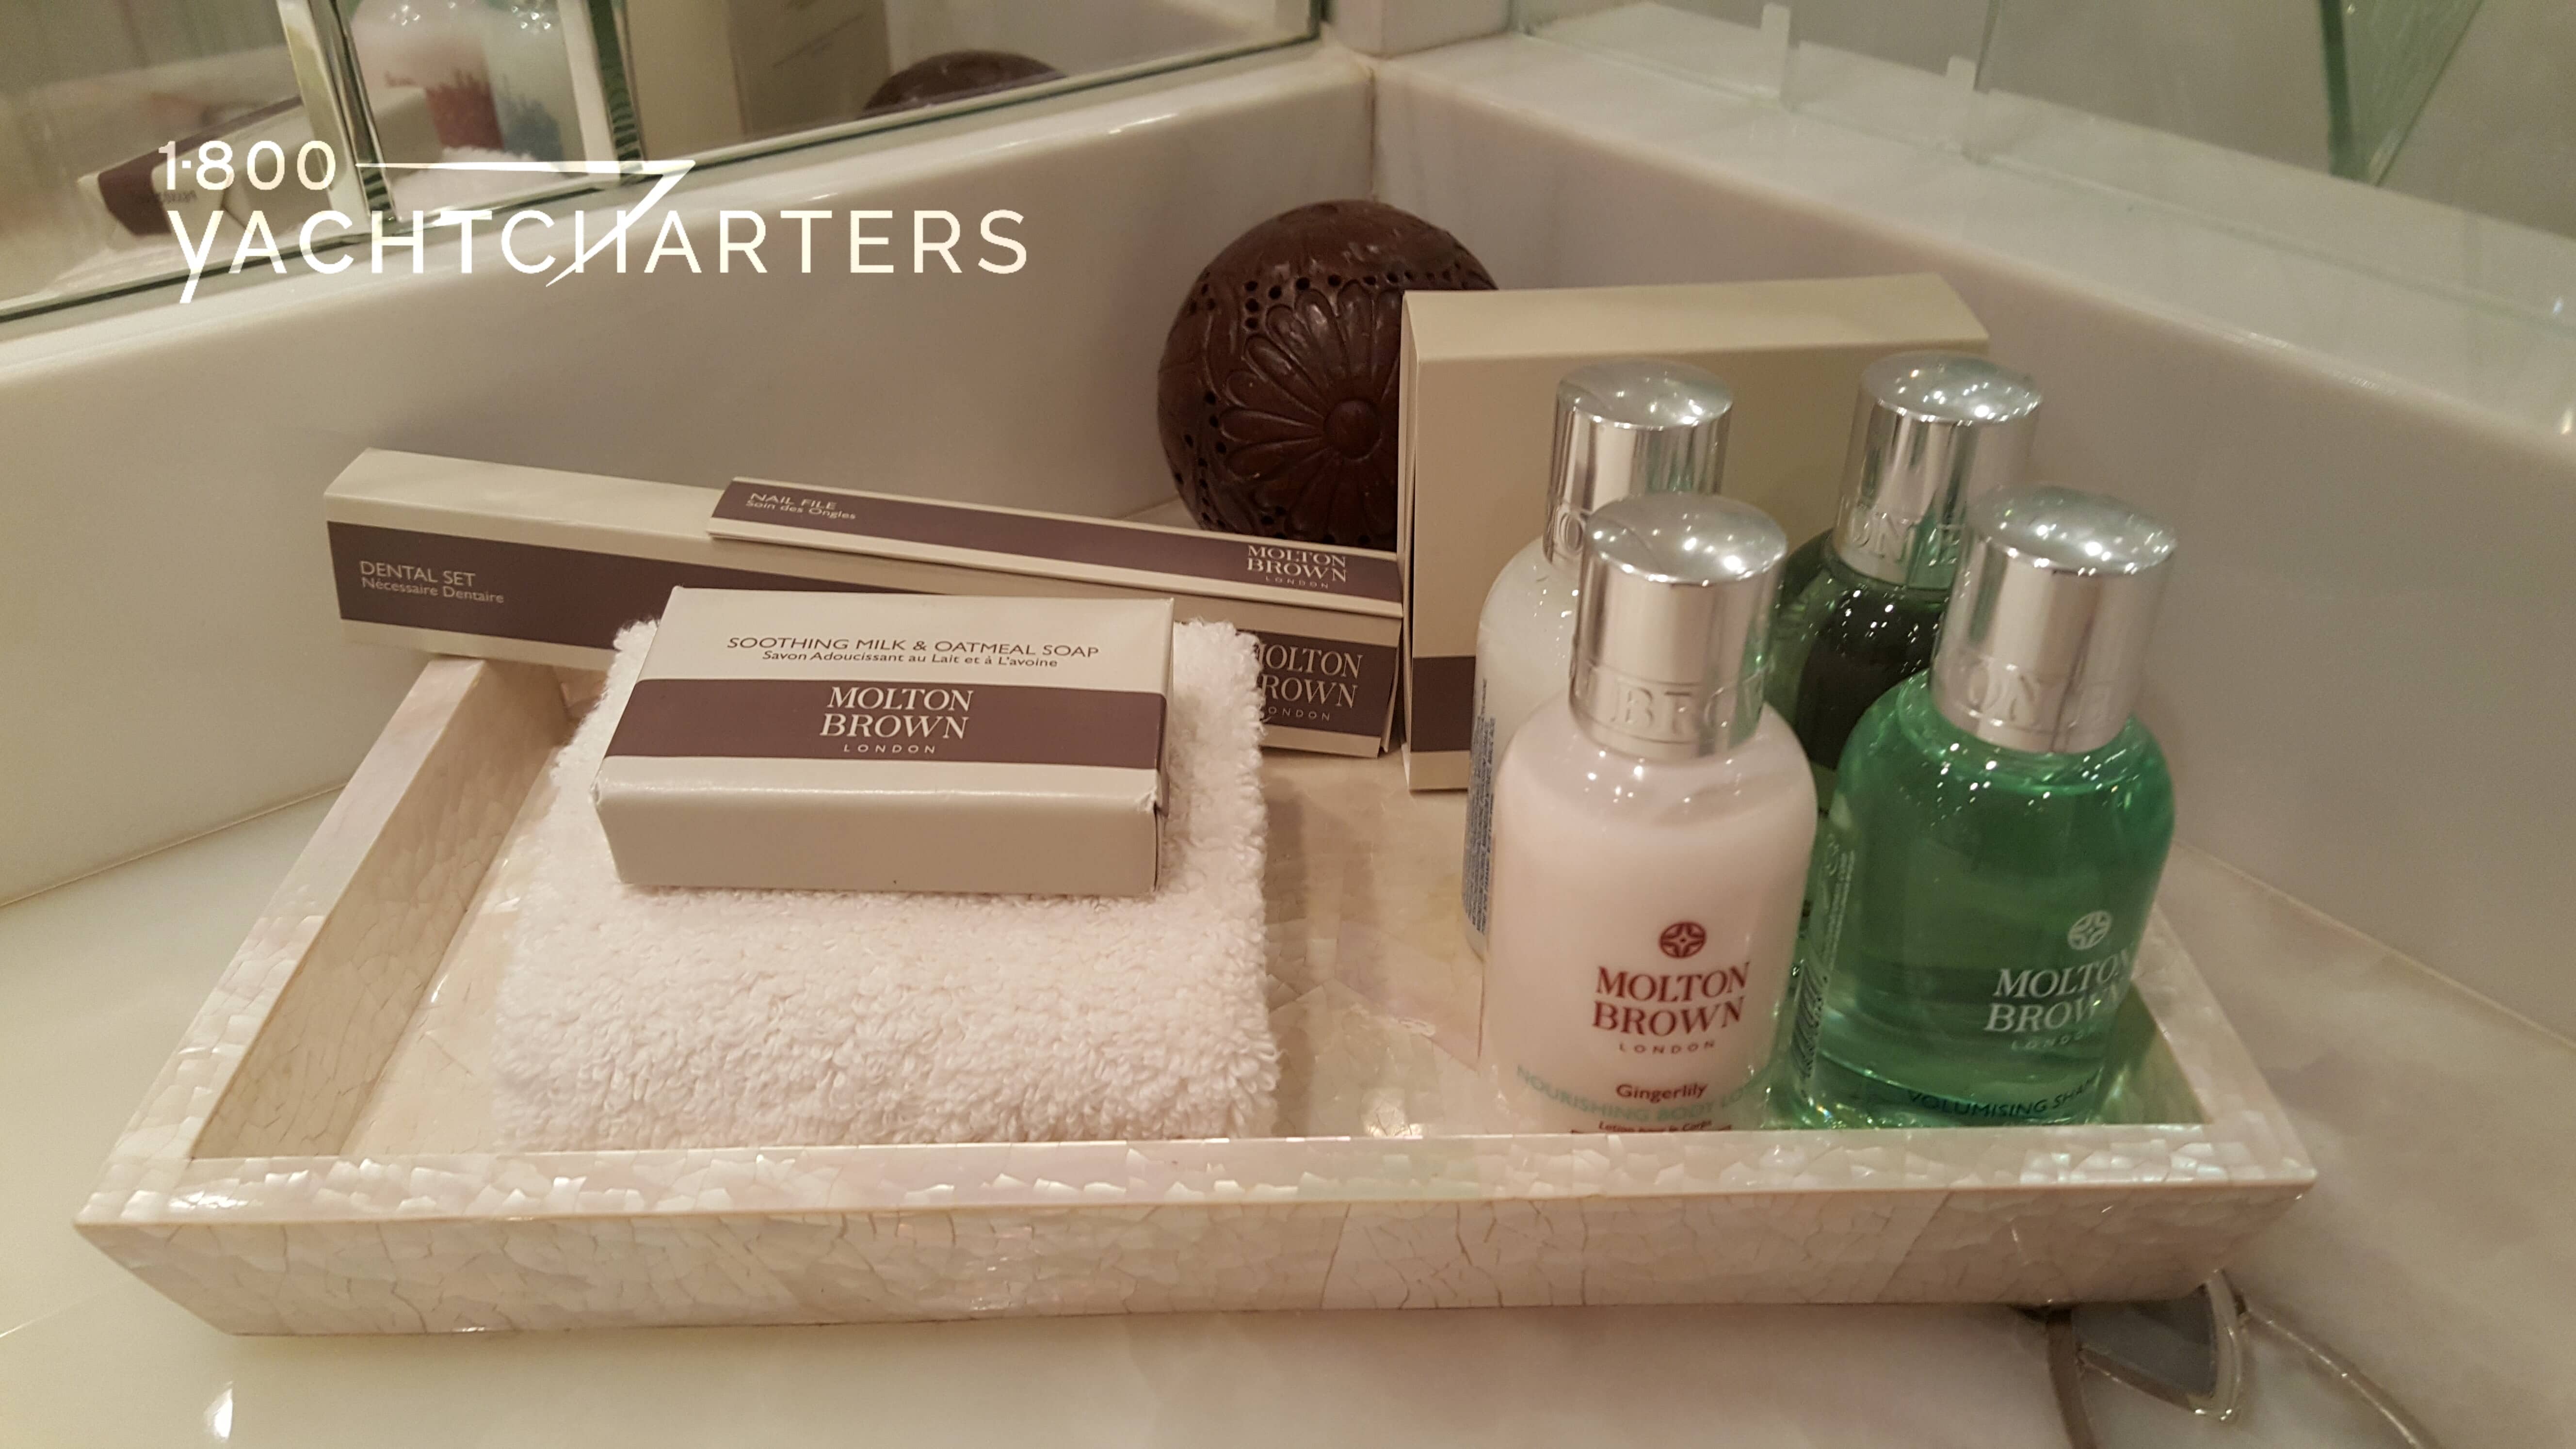 Photograph of a tray of bath products on a yacht. The products are all made by Molton Brown. The tray is beige, and the vanity is light colored marble.